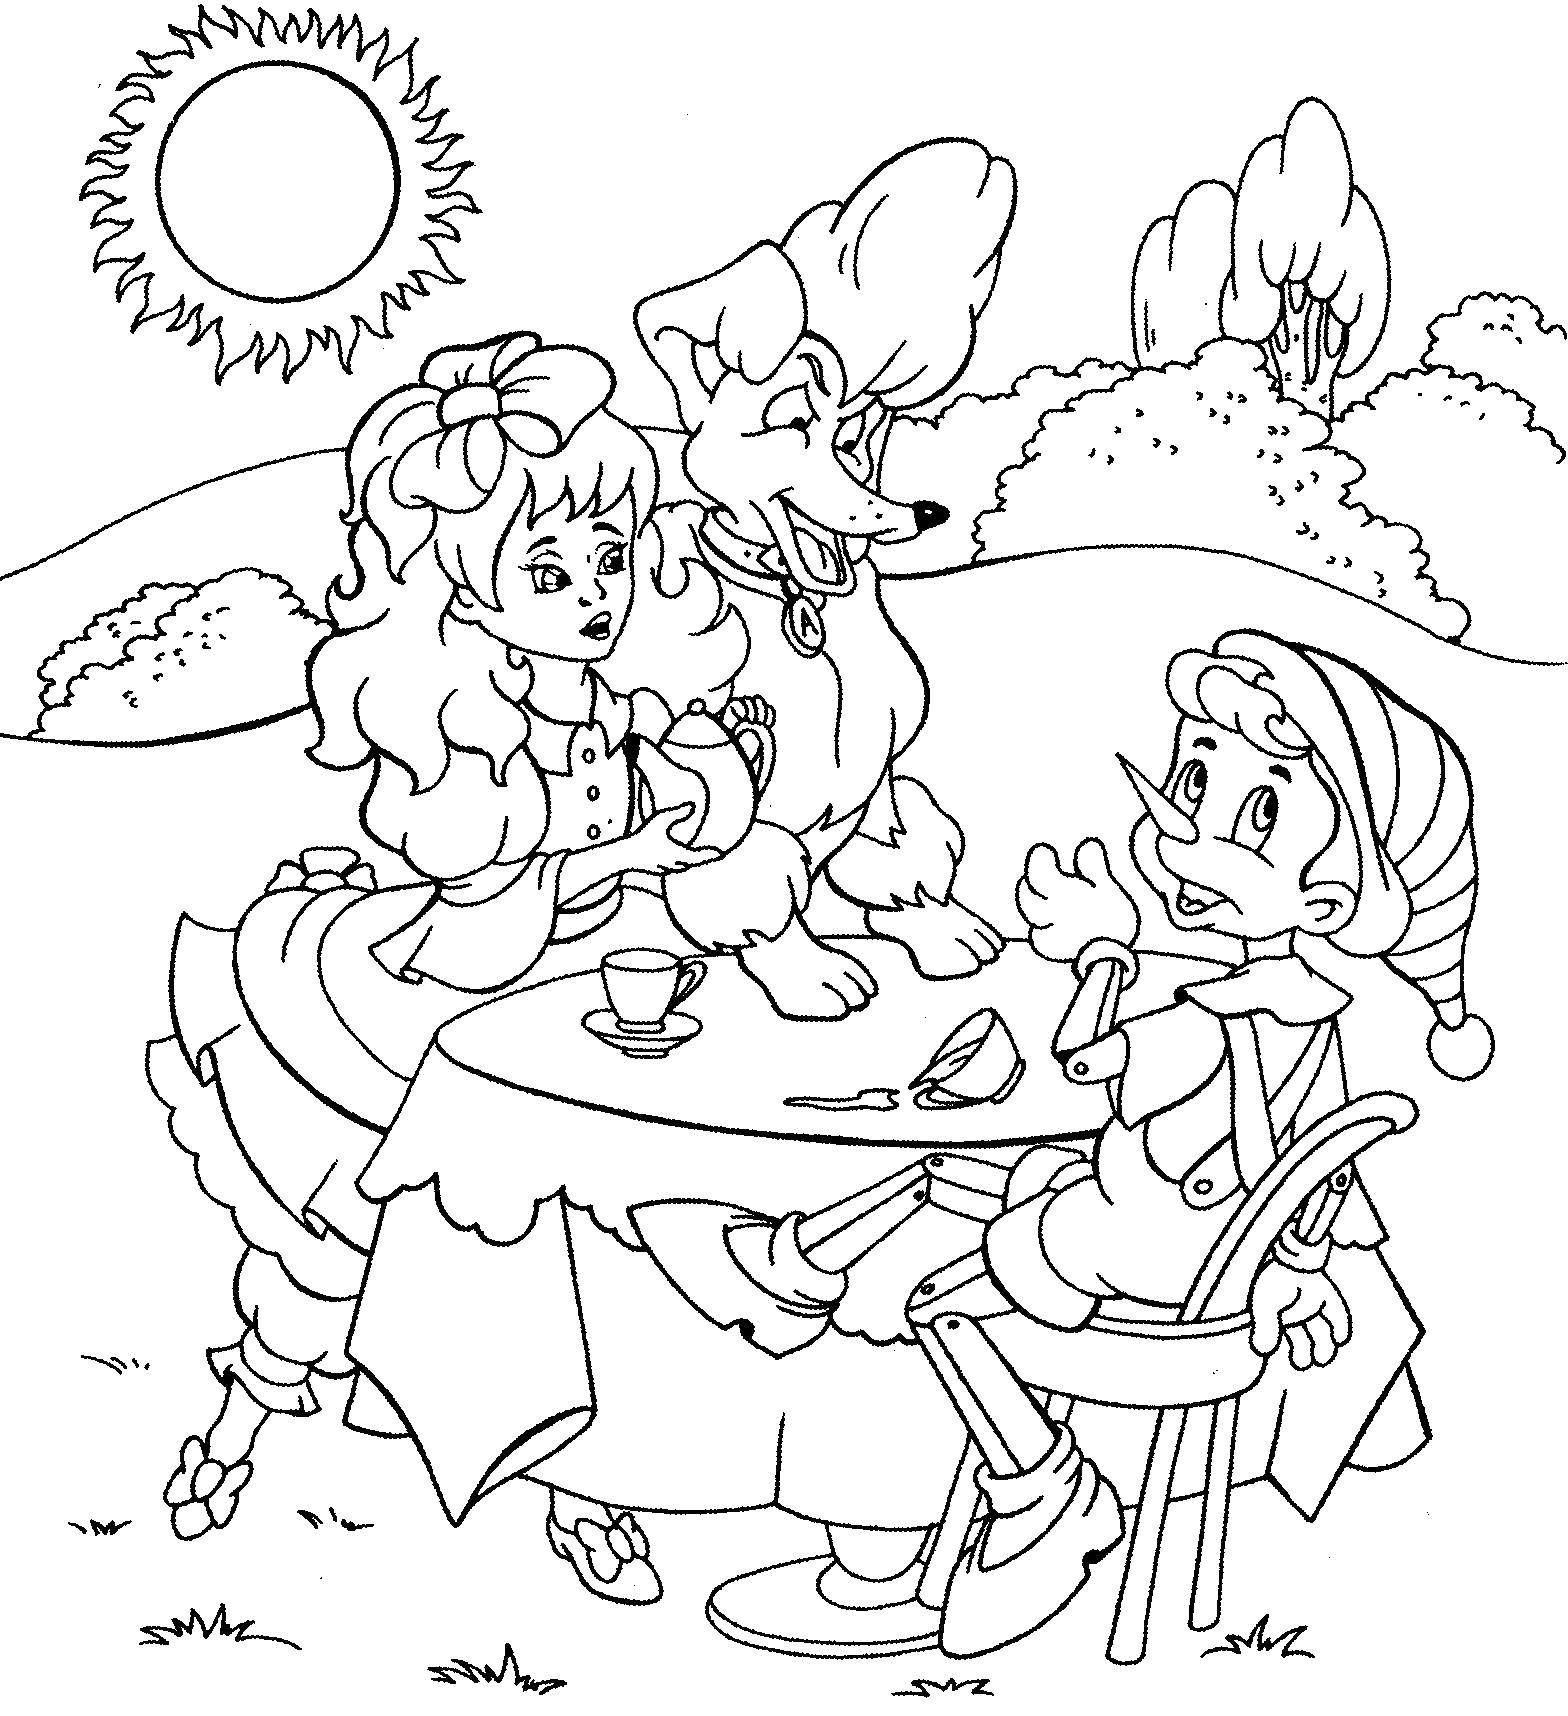 Coloring Pinocchio at the table Malvina. Category Golden key. Tags:  Pinocchio, the key.